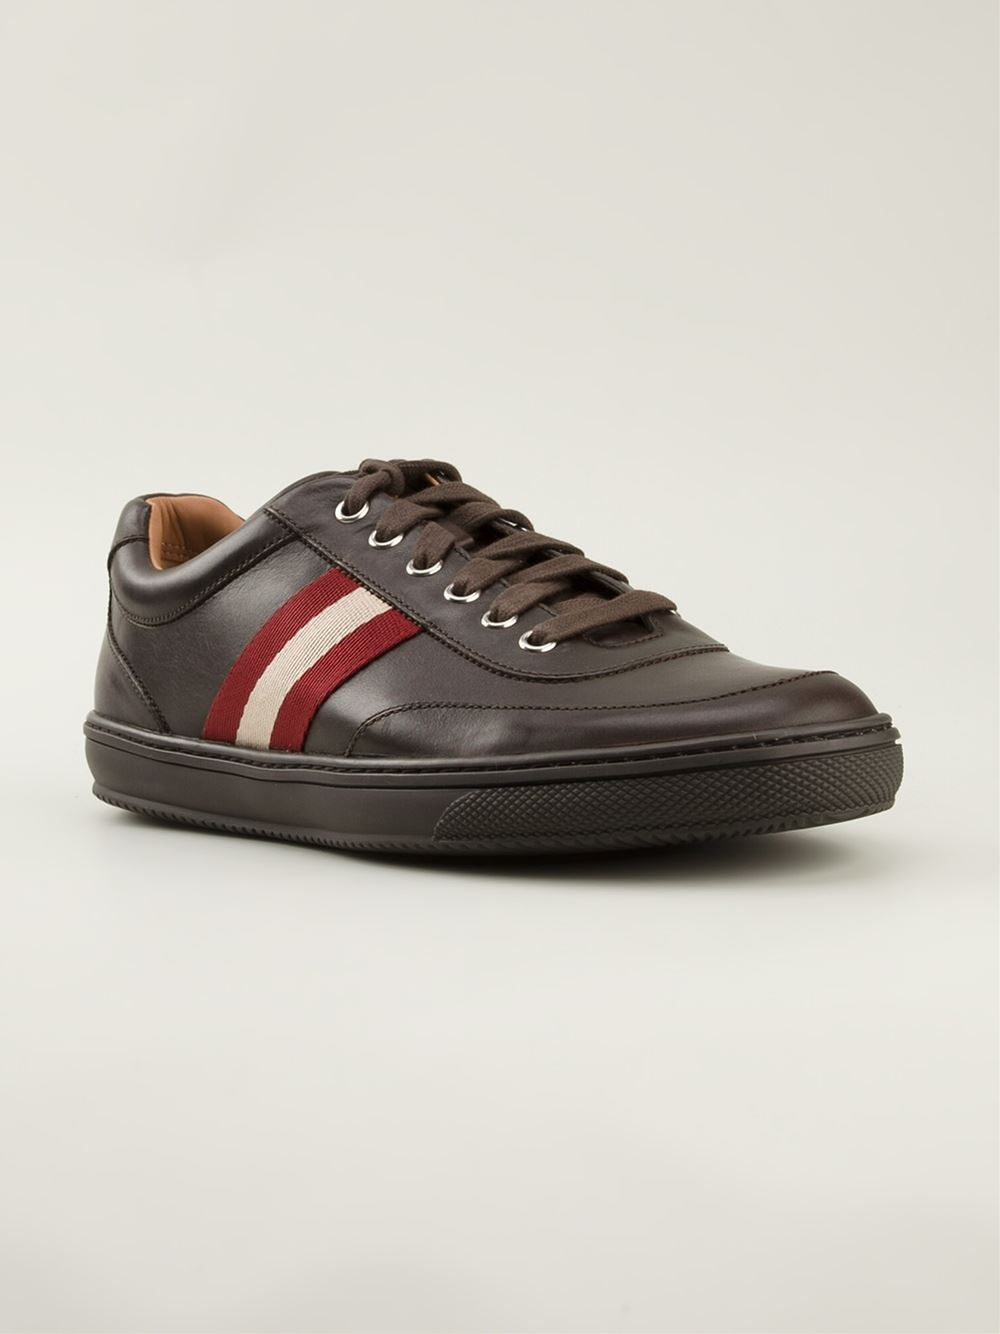 Lyst - Bally Oriano Sneakers in Brown for Men